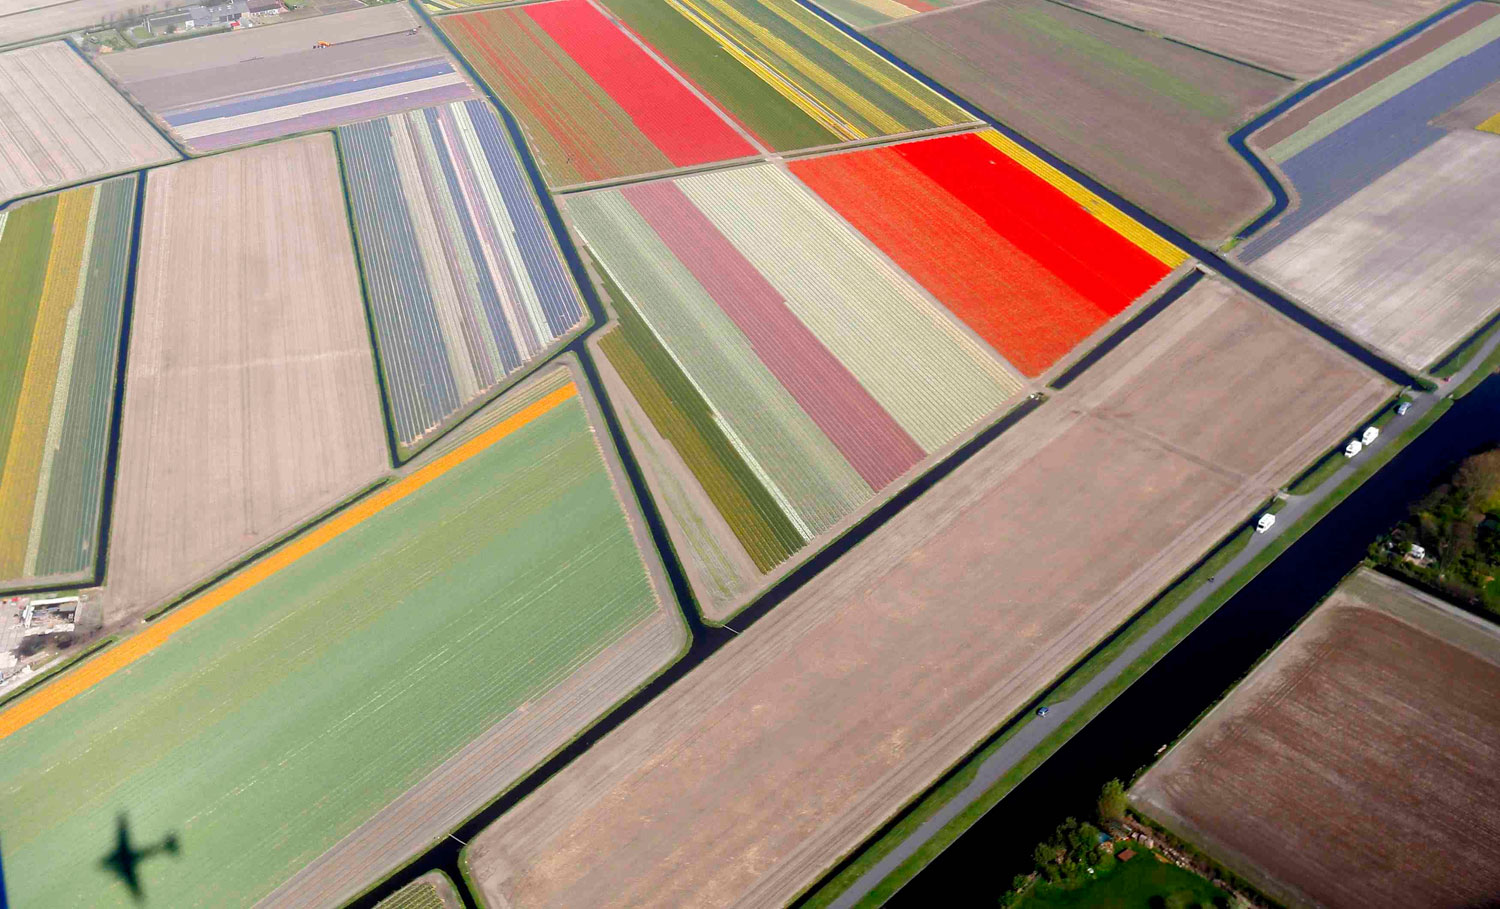 Aerial view of flower fields near the Keukenhof park, also known as the Garden of Europe, in Lisse, Netherlands, on April 9, 2014.